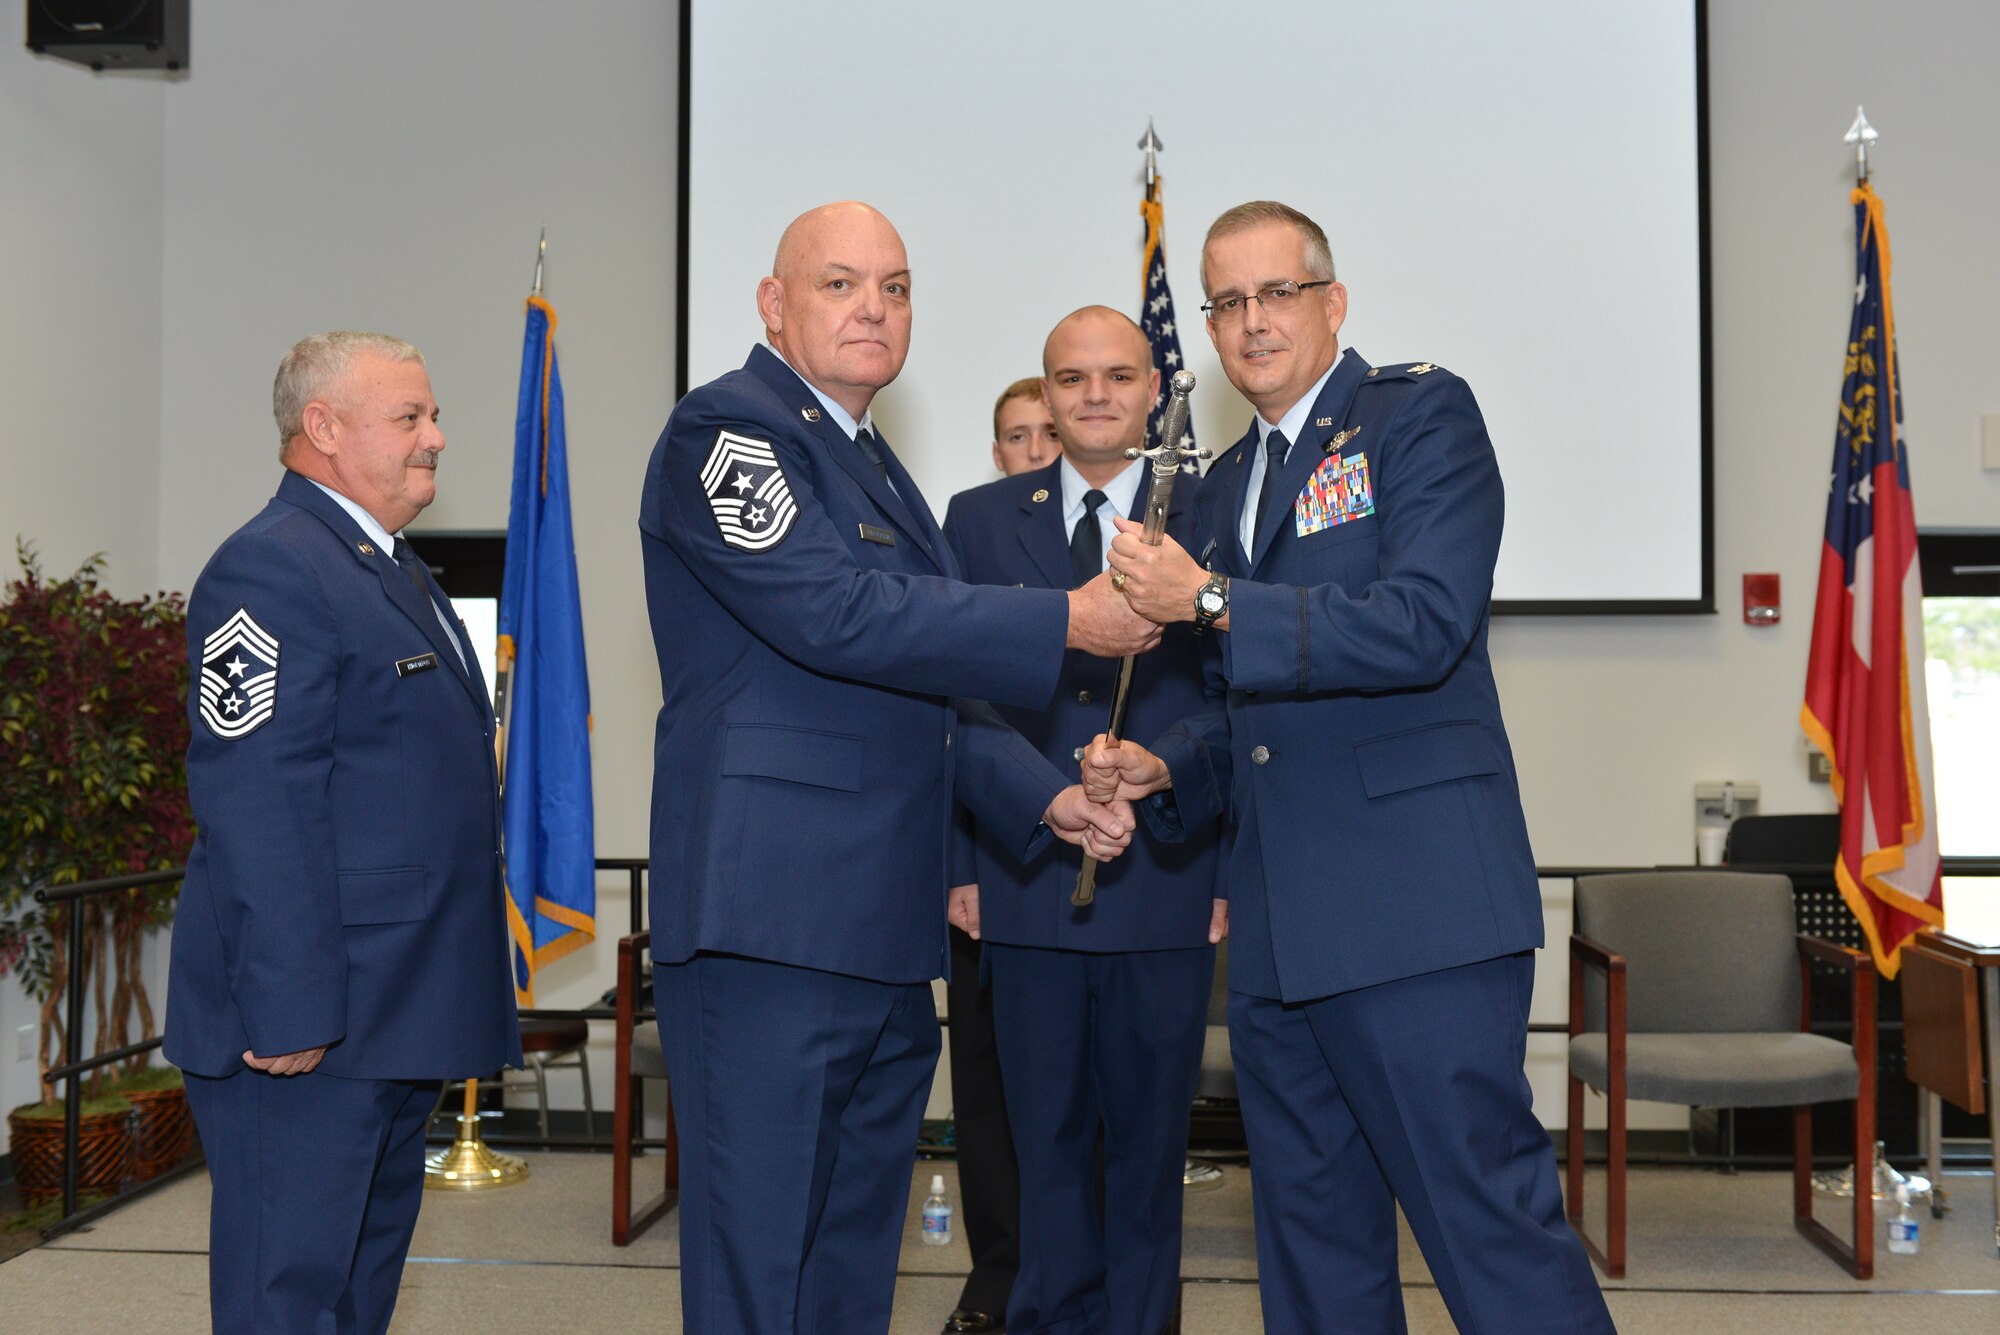 165th Airlift Wing Chief Master Sgt. Roy Patterson receives the sword of office from Col. Rainer Gomez, 165AW Air Commander, November 2, 2013 during a change of responsibility ceremony held at Savannah Air National Guard Base in Garden City, Ga. Patterson assumes the duties of Command Chief from Chief Master Sgt. Hewshal Thornton who held the senior enlisted position since 2007. (U.S. Air National Guard photo by Staff Sgt. Noel Velez-Crespo/released)